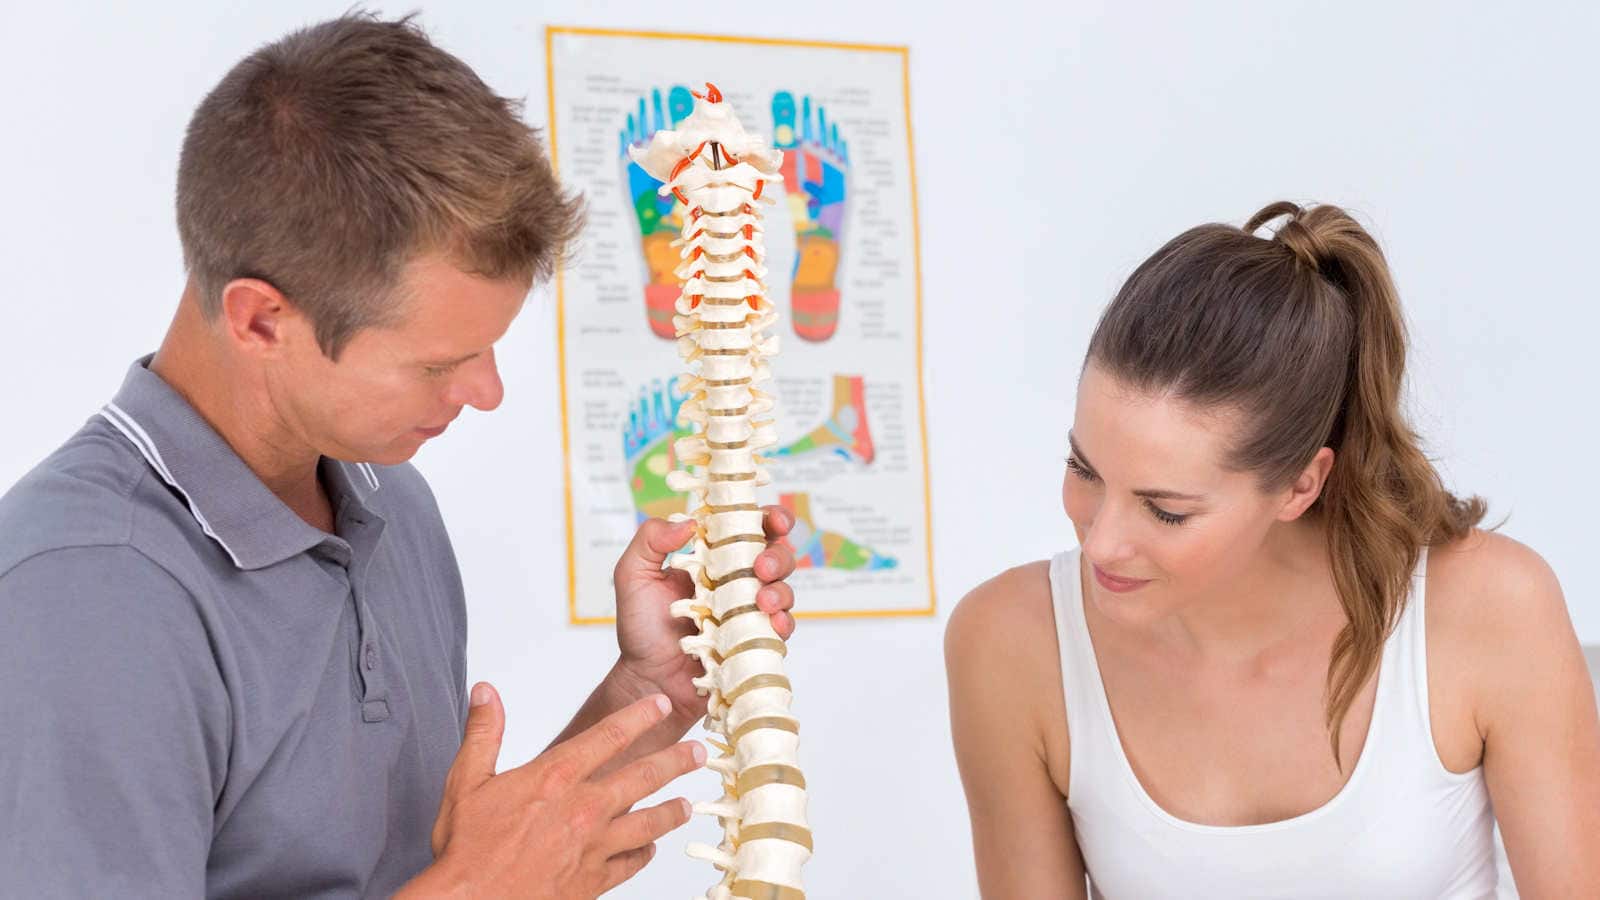 Dr Connies Chiropractic Center of Overland Park